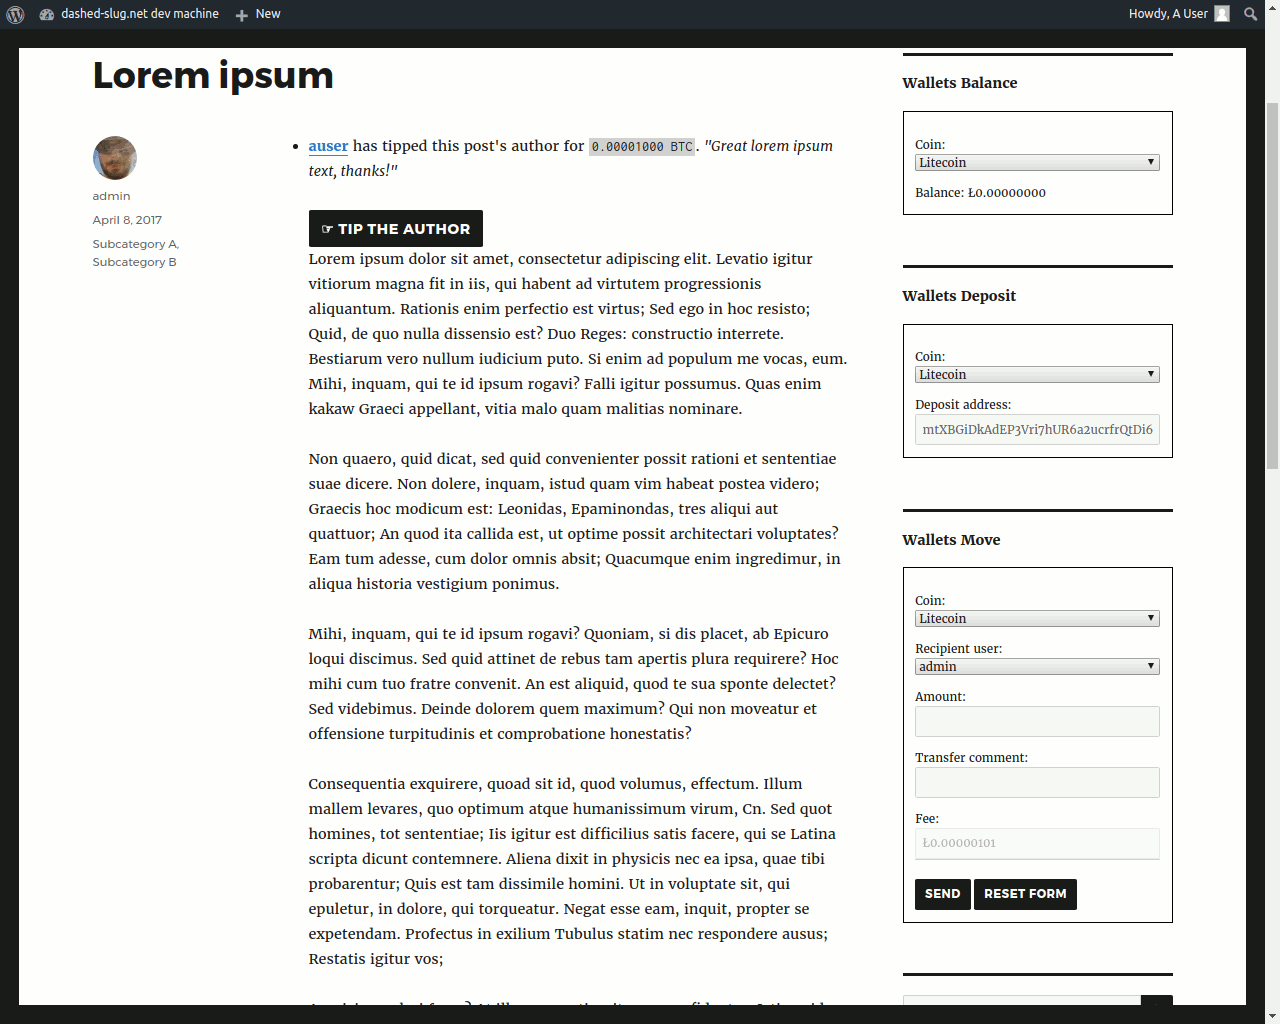 List of tips and tipping button at header of article.